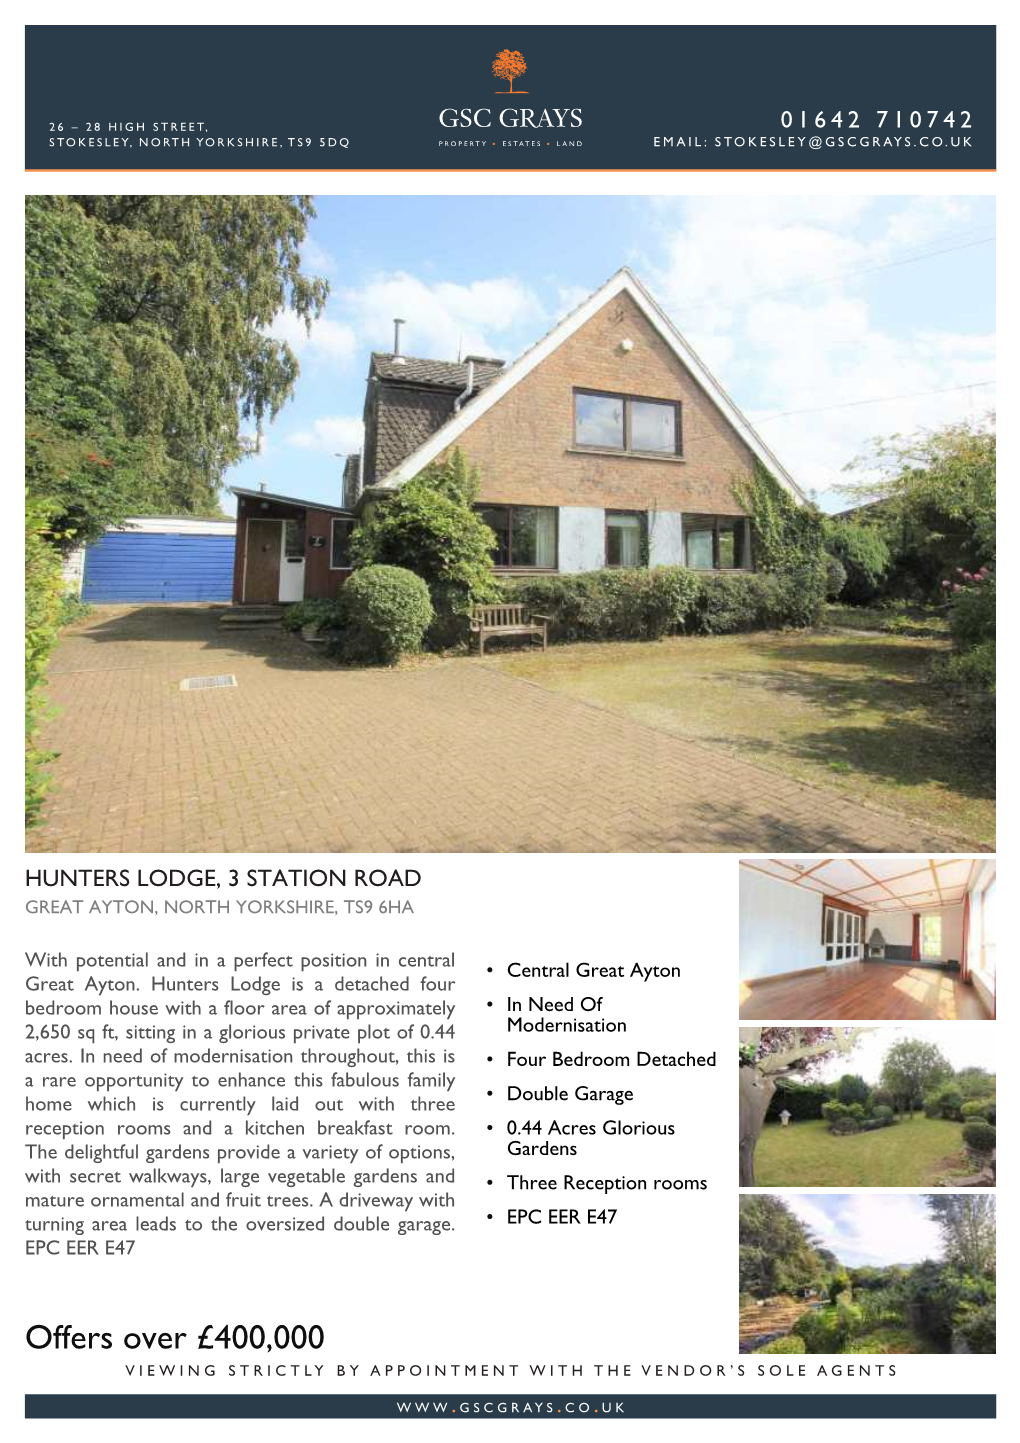 Offers Over £400,000 VIEWING STRICTLY by APPOINTMENT with the VENDOR’S SOLE AGENTS